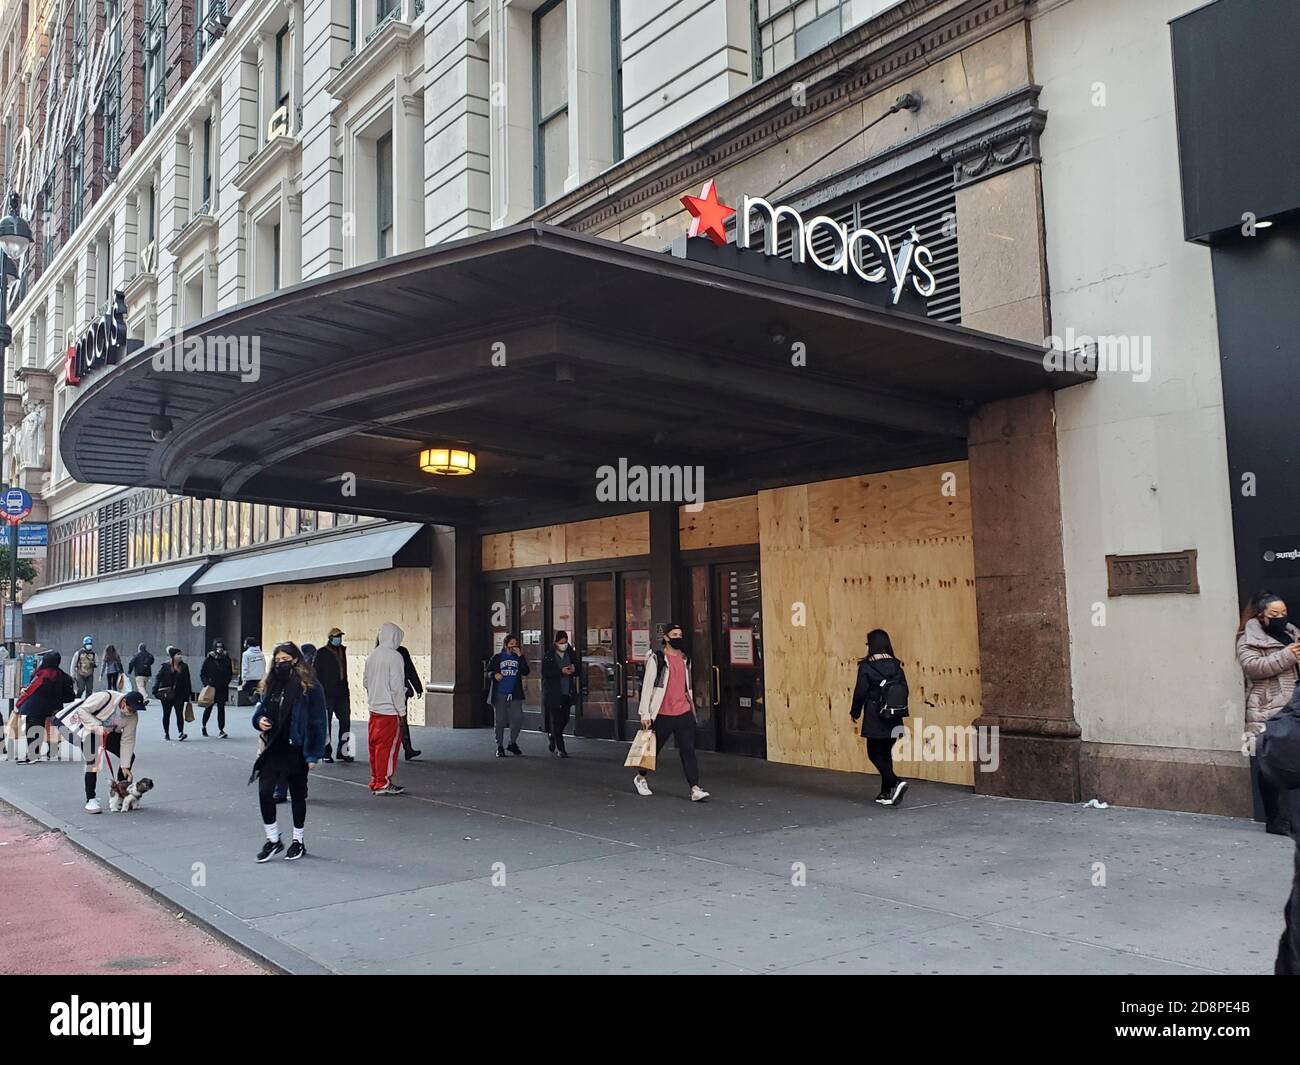 October 31, 2020, New York, New York, USA: Macy's Flagship store in Manhattan boarded up there windows in anticipation of protests before the November 3,2020.elections also other storefronts  and Fox News boarded up there front of the building. (Credit Image: © Bruce Cotler/ZUMA Wire) Stock Photo